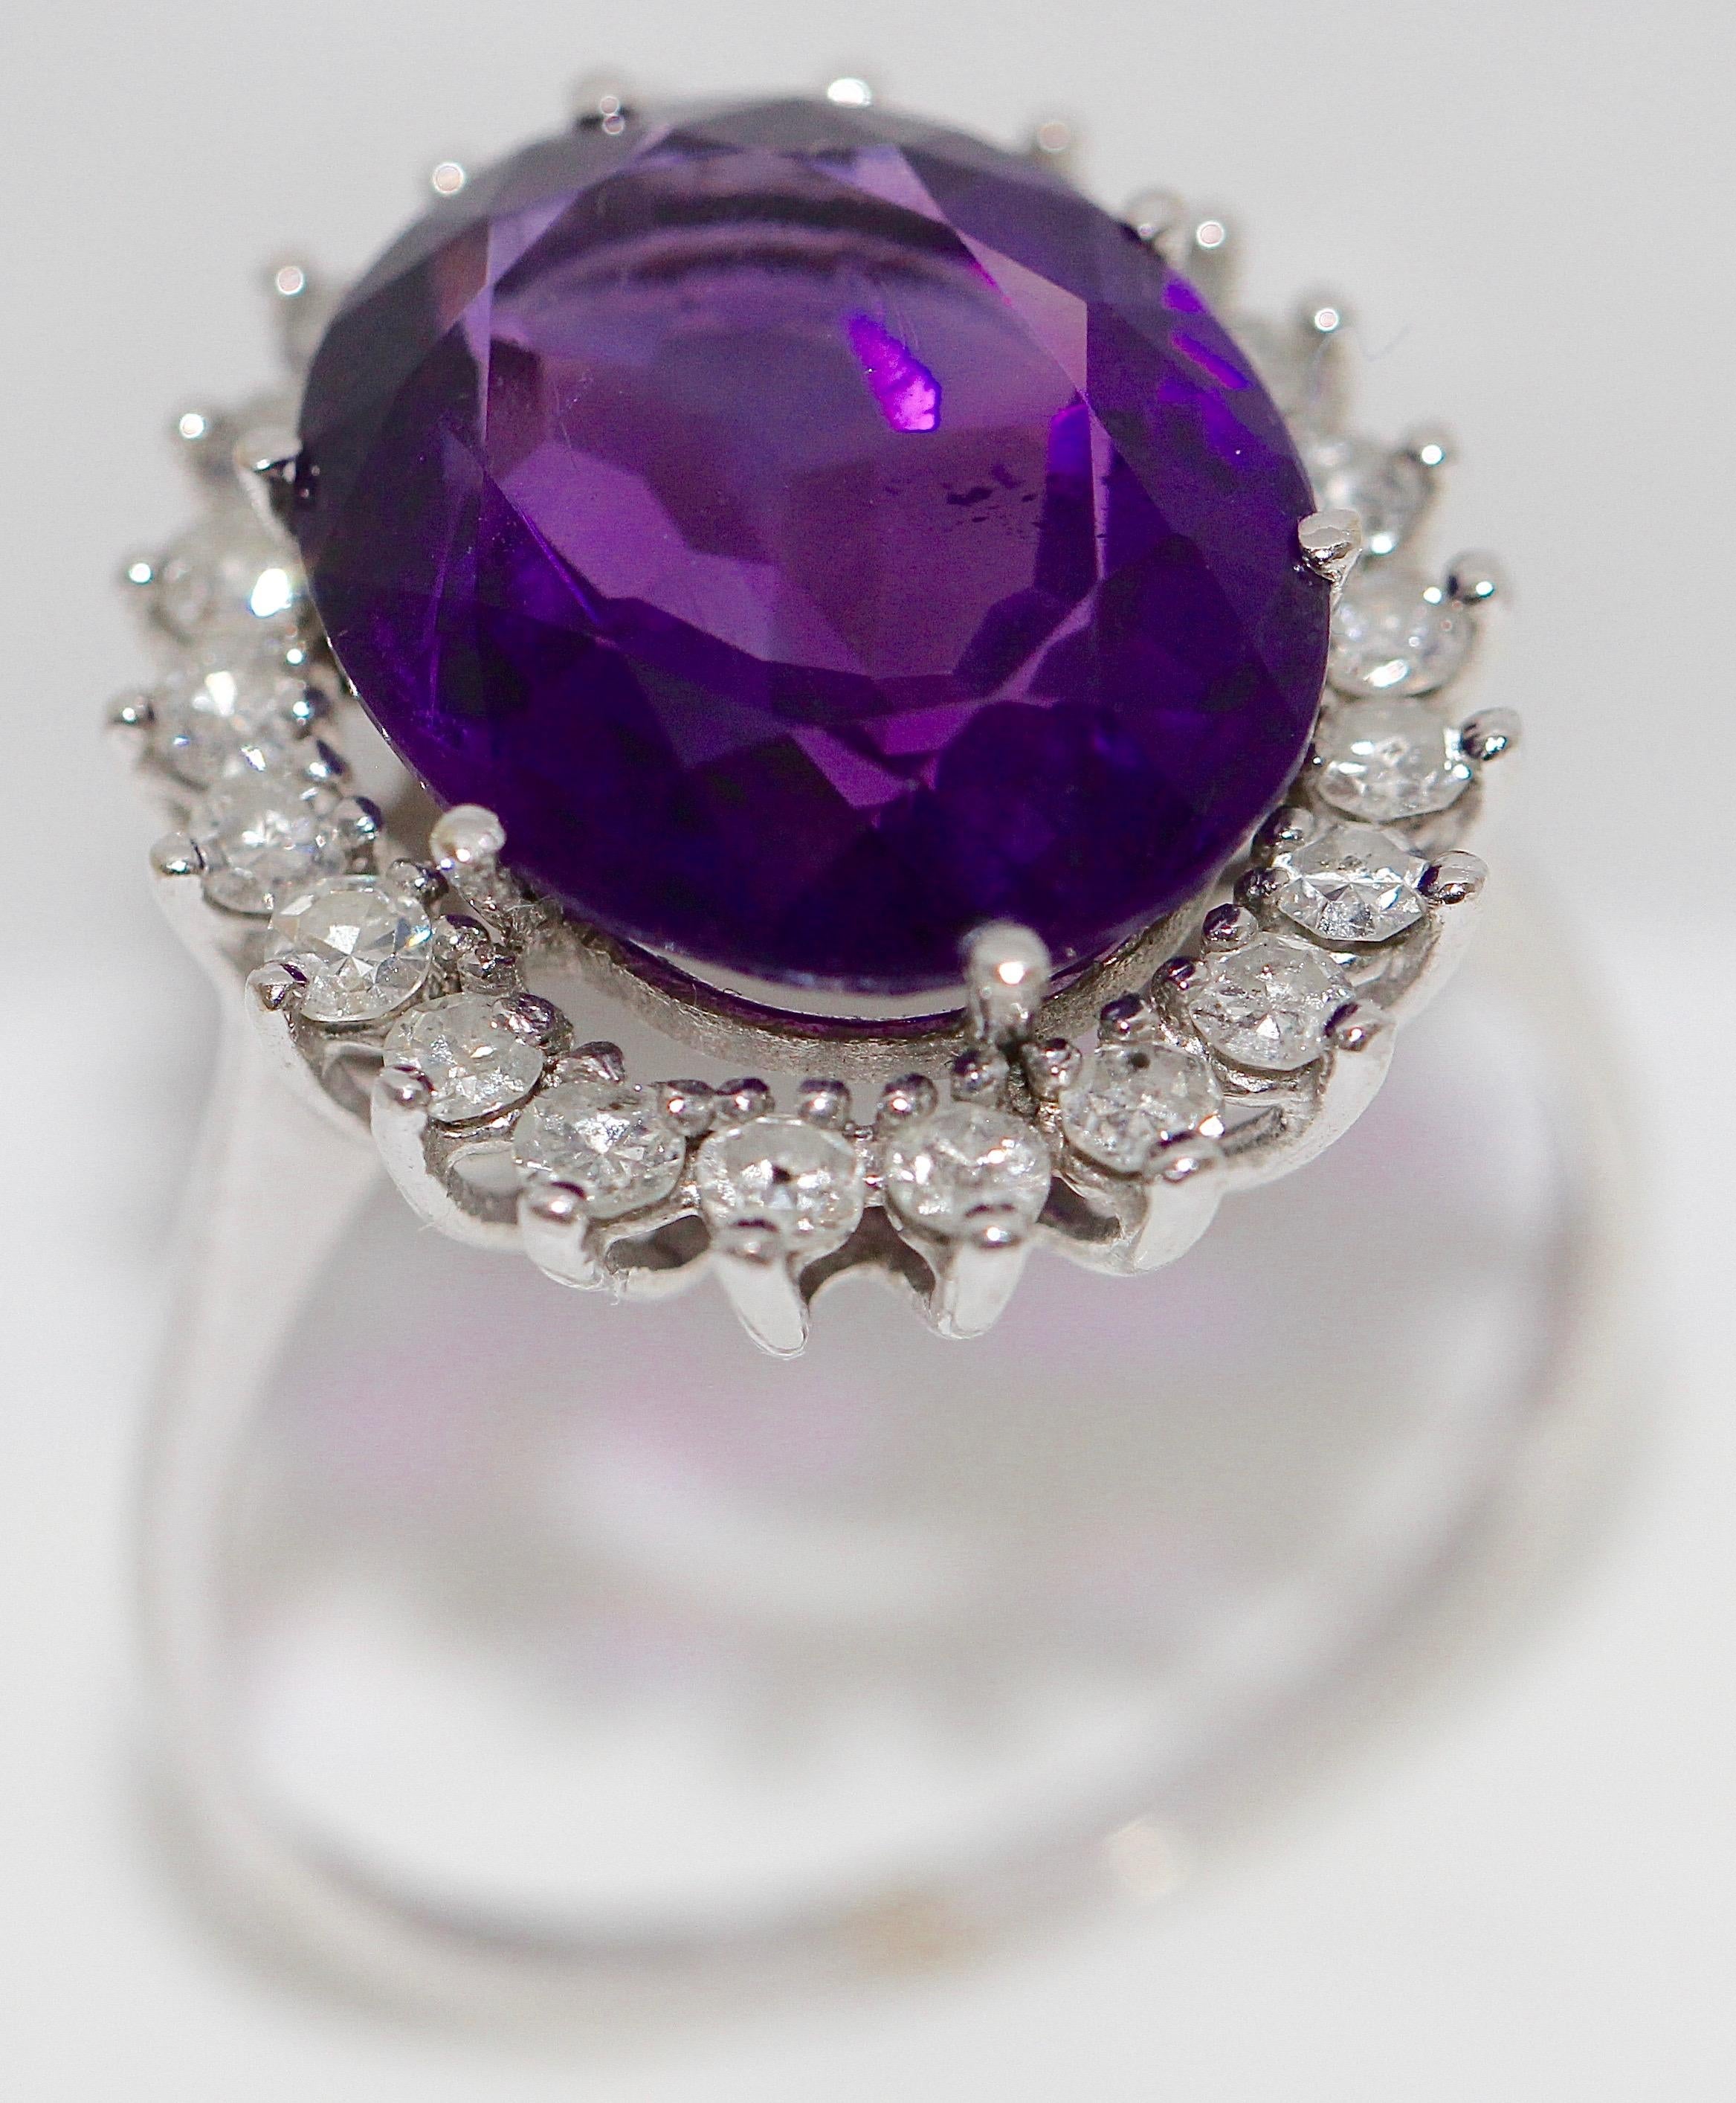 Beautiful ring with large, faceted amethyst in strong color.
Surrounded by many little diamonds.

Size of Amethyst: 15mm x 12mm.

Very good condition.